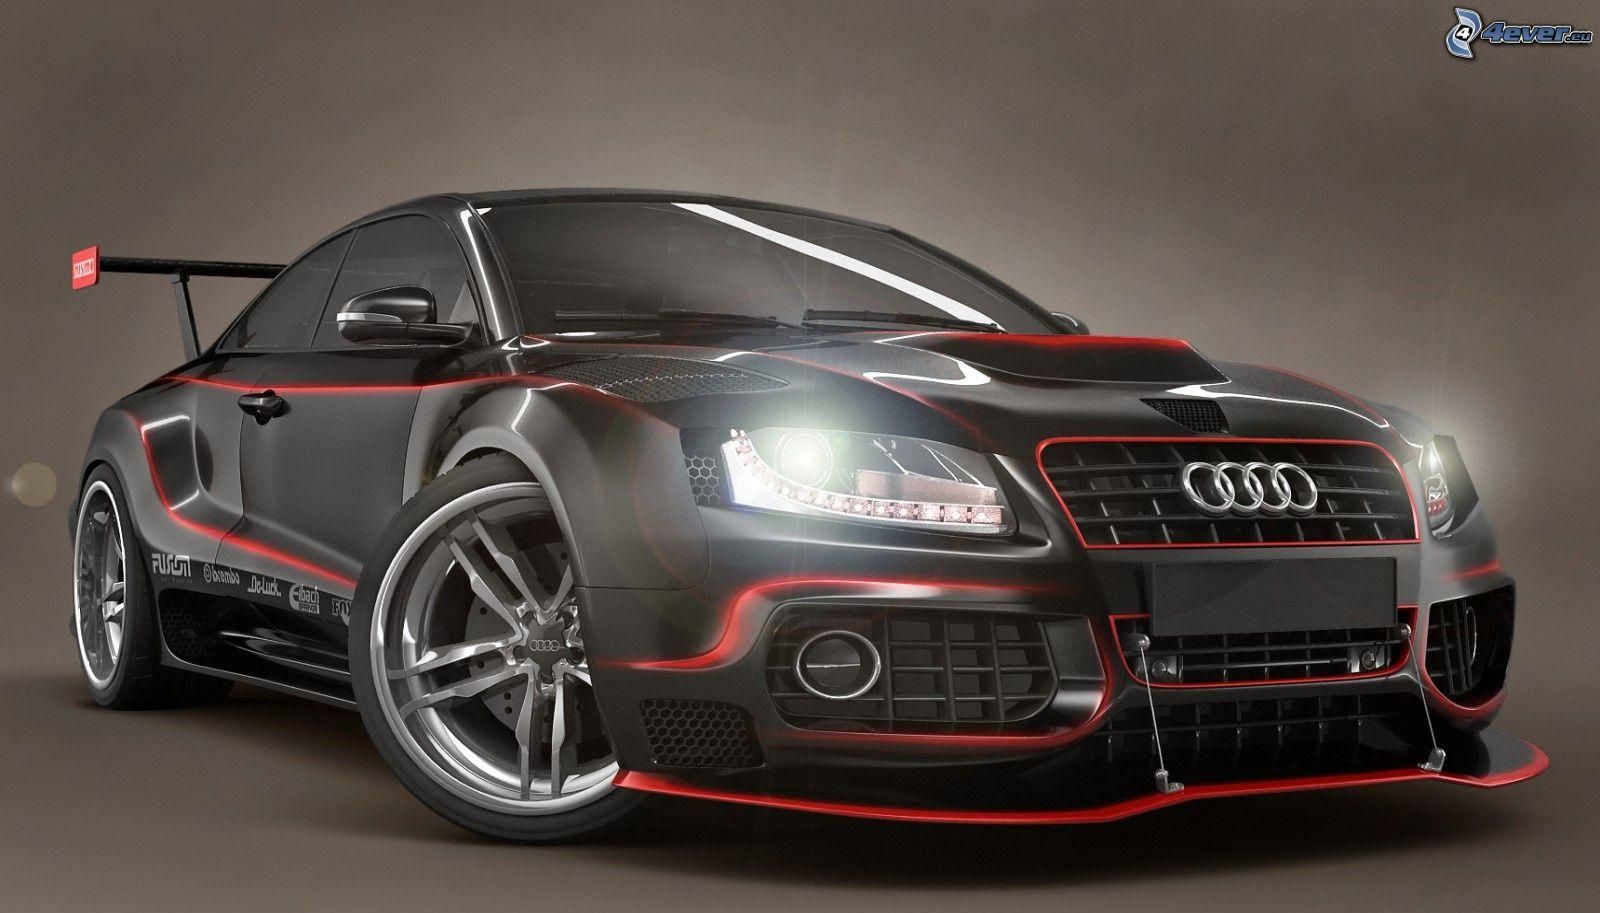 http://pictures.4ever.eu/data/download/cars/tuning/audi,-tuning-214391.jpg?no-logo